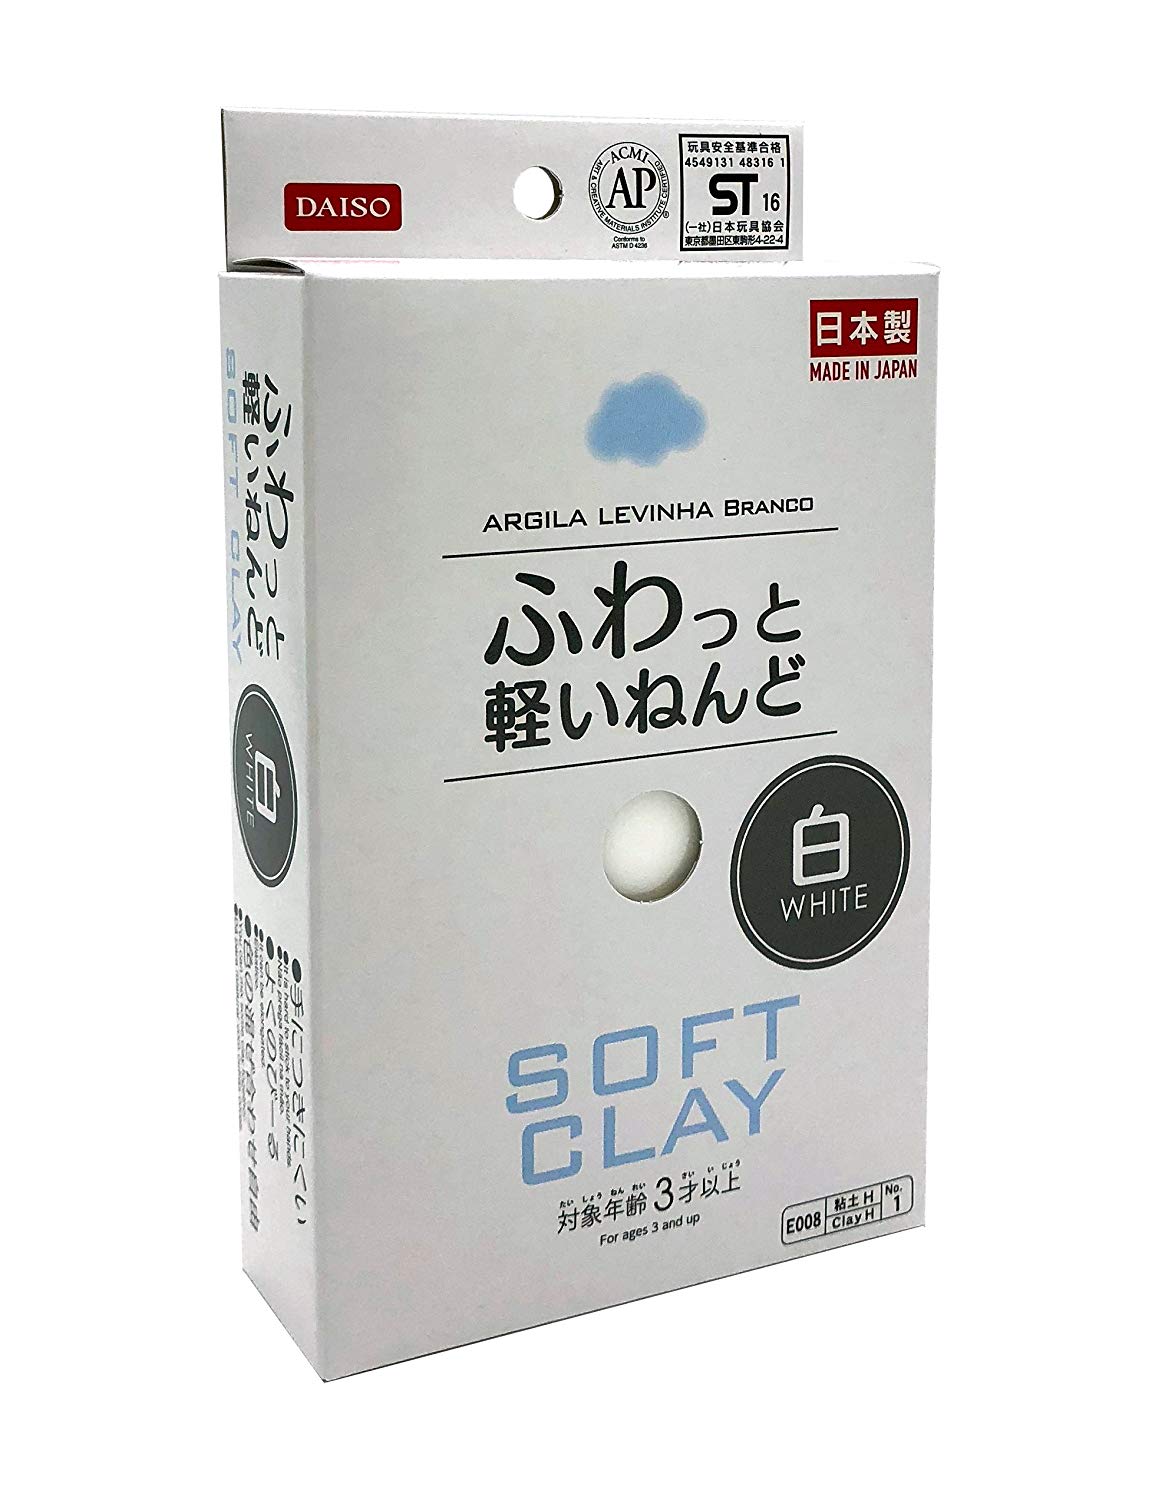 Daiso Japan Soft Clay White, Box of 12 – Value Products Global